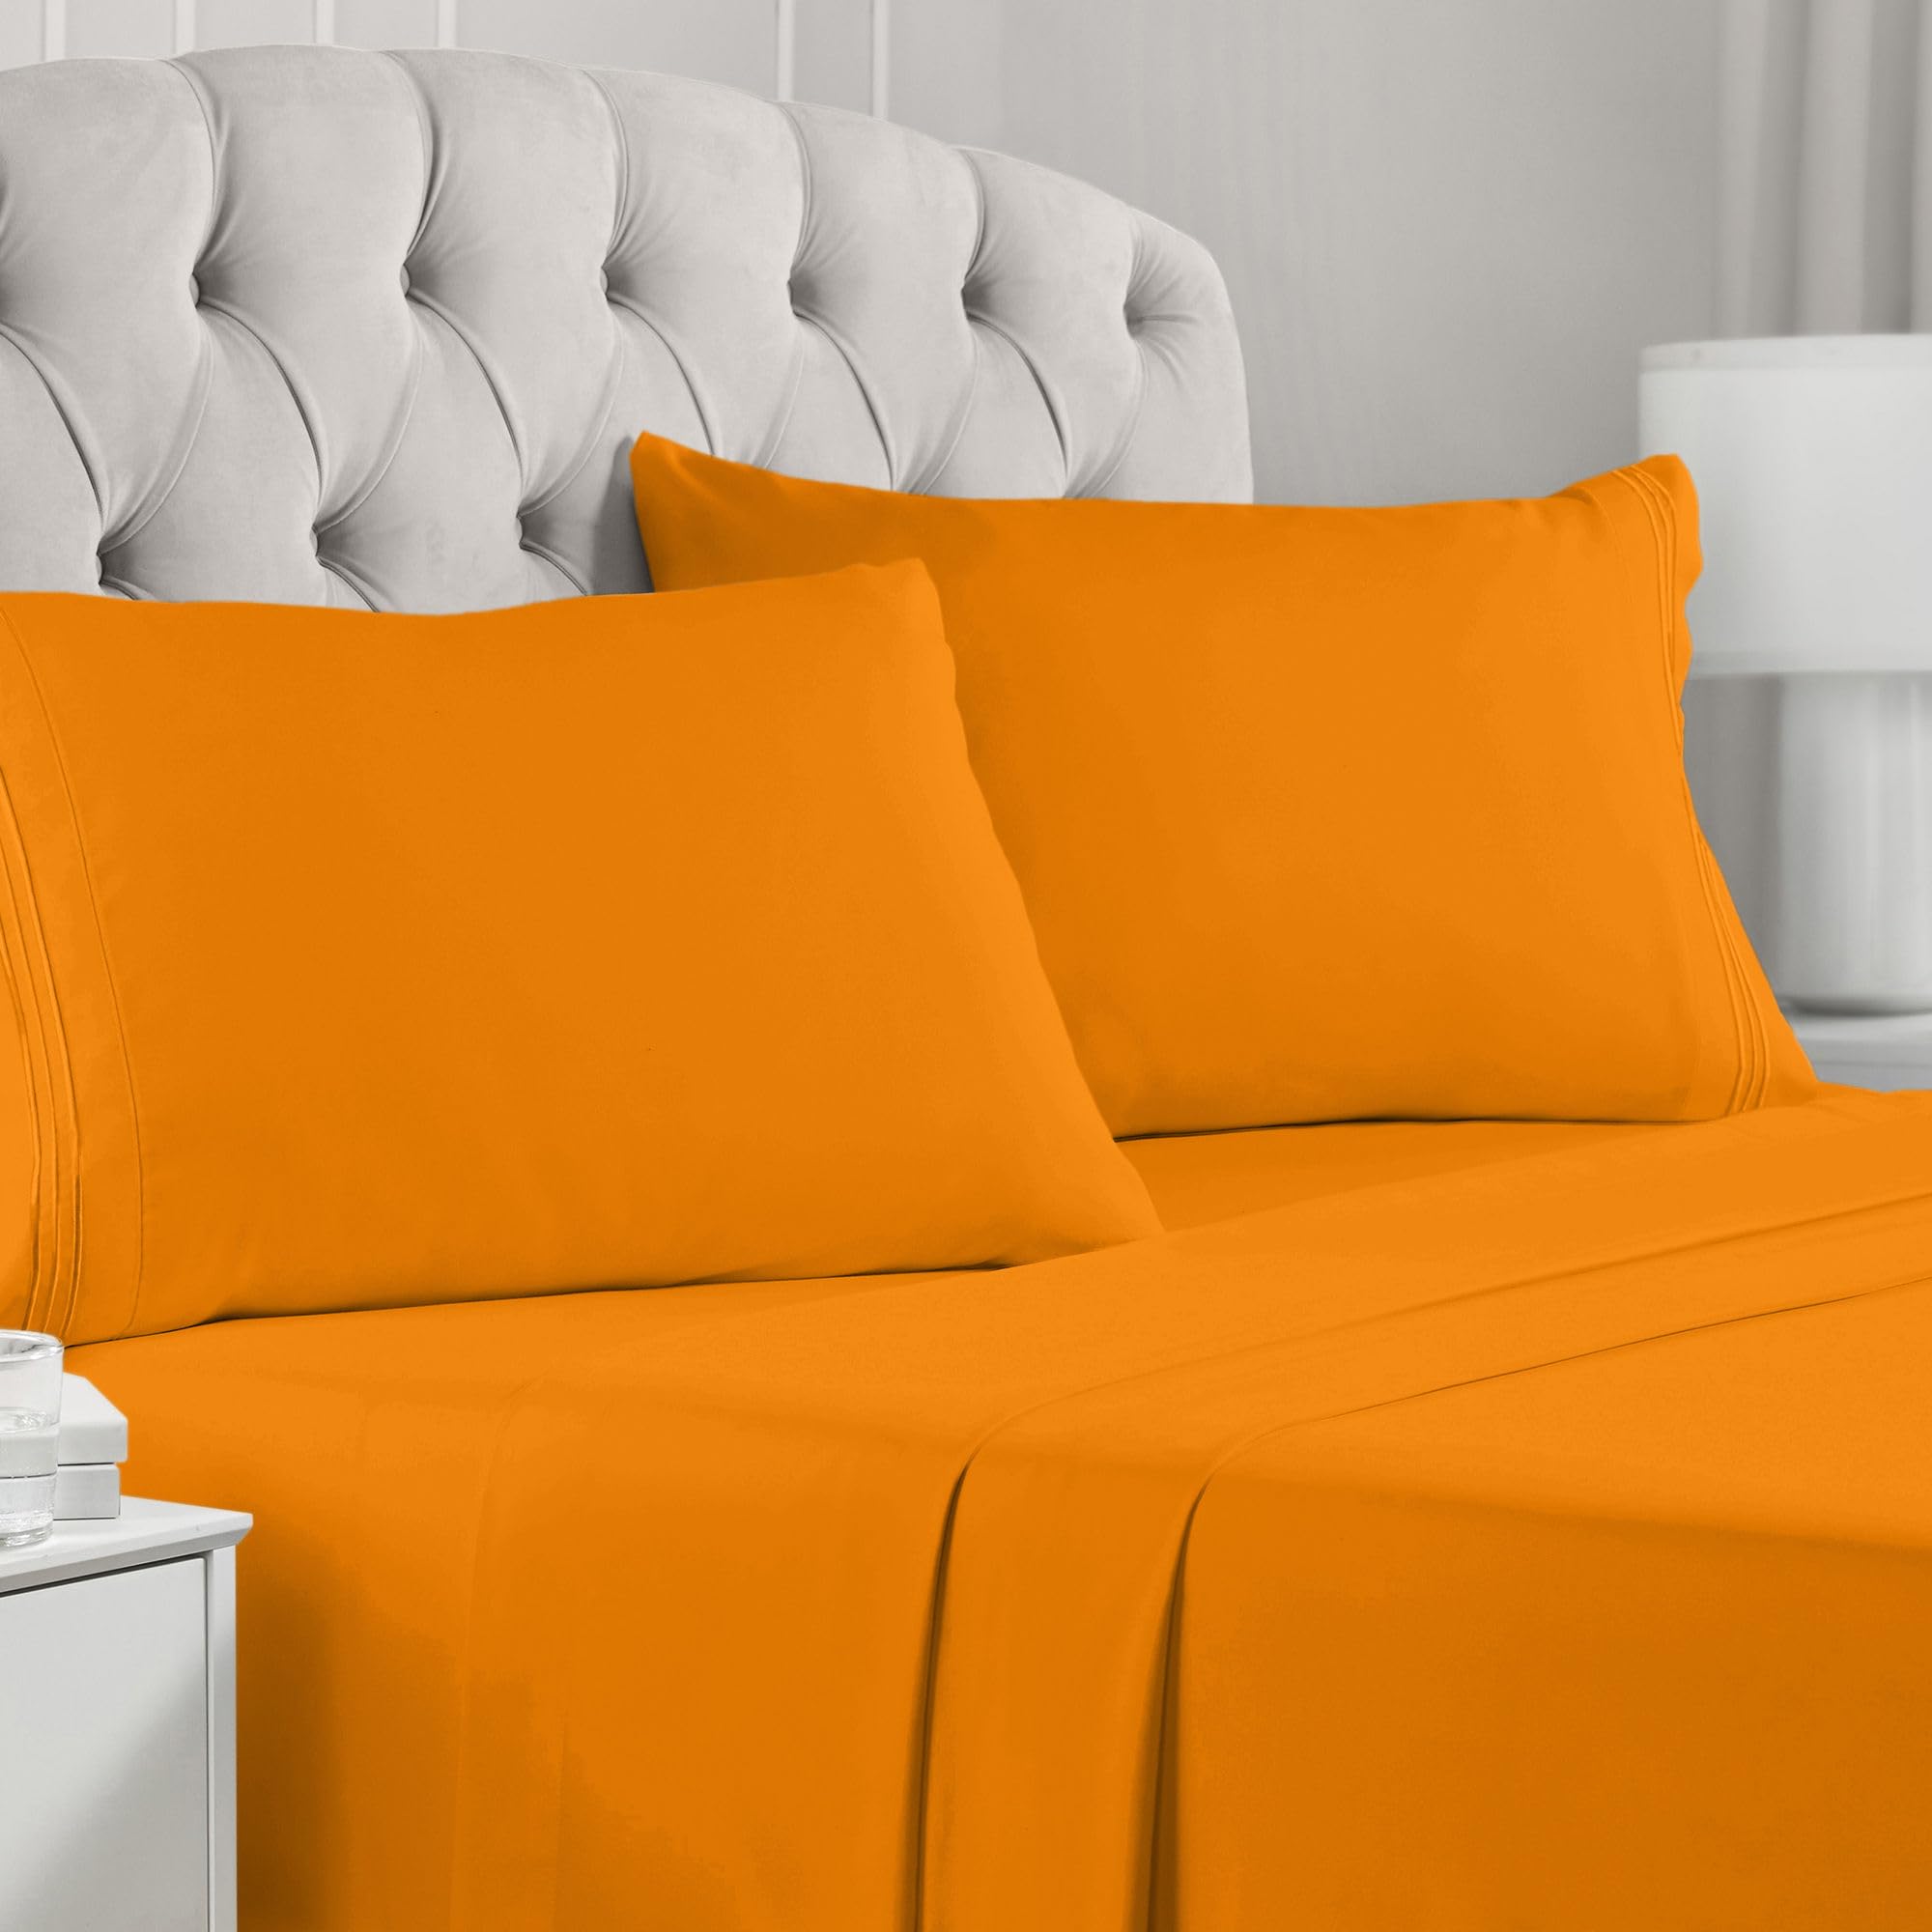 Book Cover Mellanni Queen Sheet Set - Hotel Luxury 1800 Bedding Sheets & Pillowcases - Extra Soft Cooling Bed Sheets - Deep Pocket up to 16 inch - Wrinkle, Fade, Stain Resistant - 4 Piece (Queen, Persimmon)